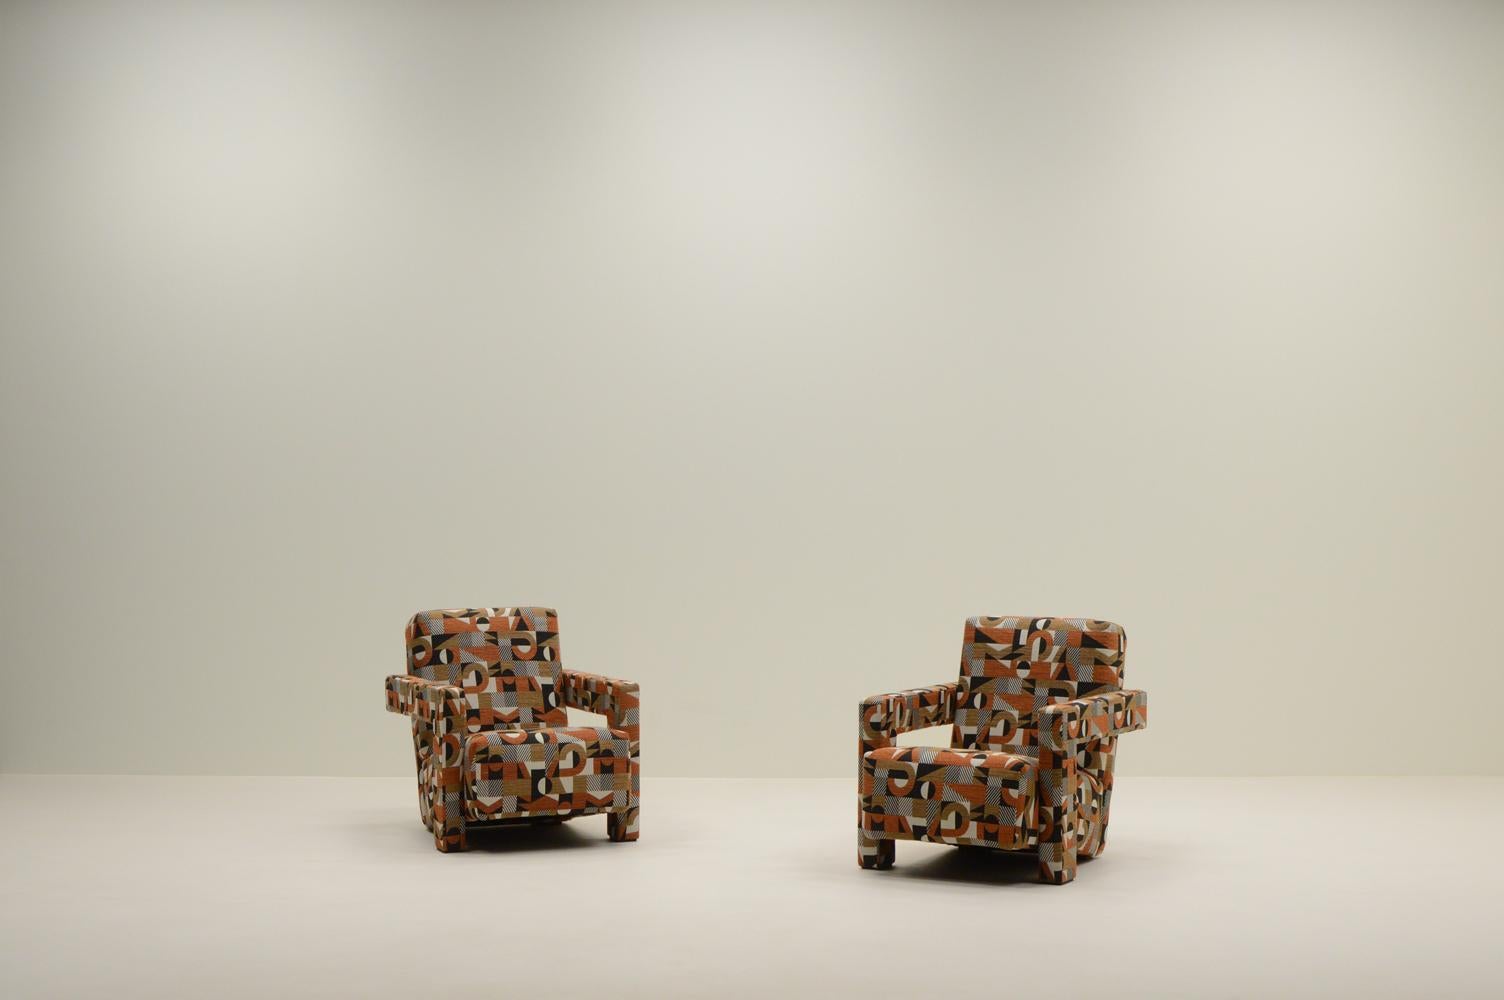 Mid-Century Modern Jacquard “Utrecht” chair by Gerrit Rietveld for Cassina, 1990s Italy.  For Sale